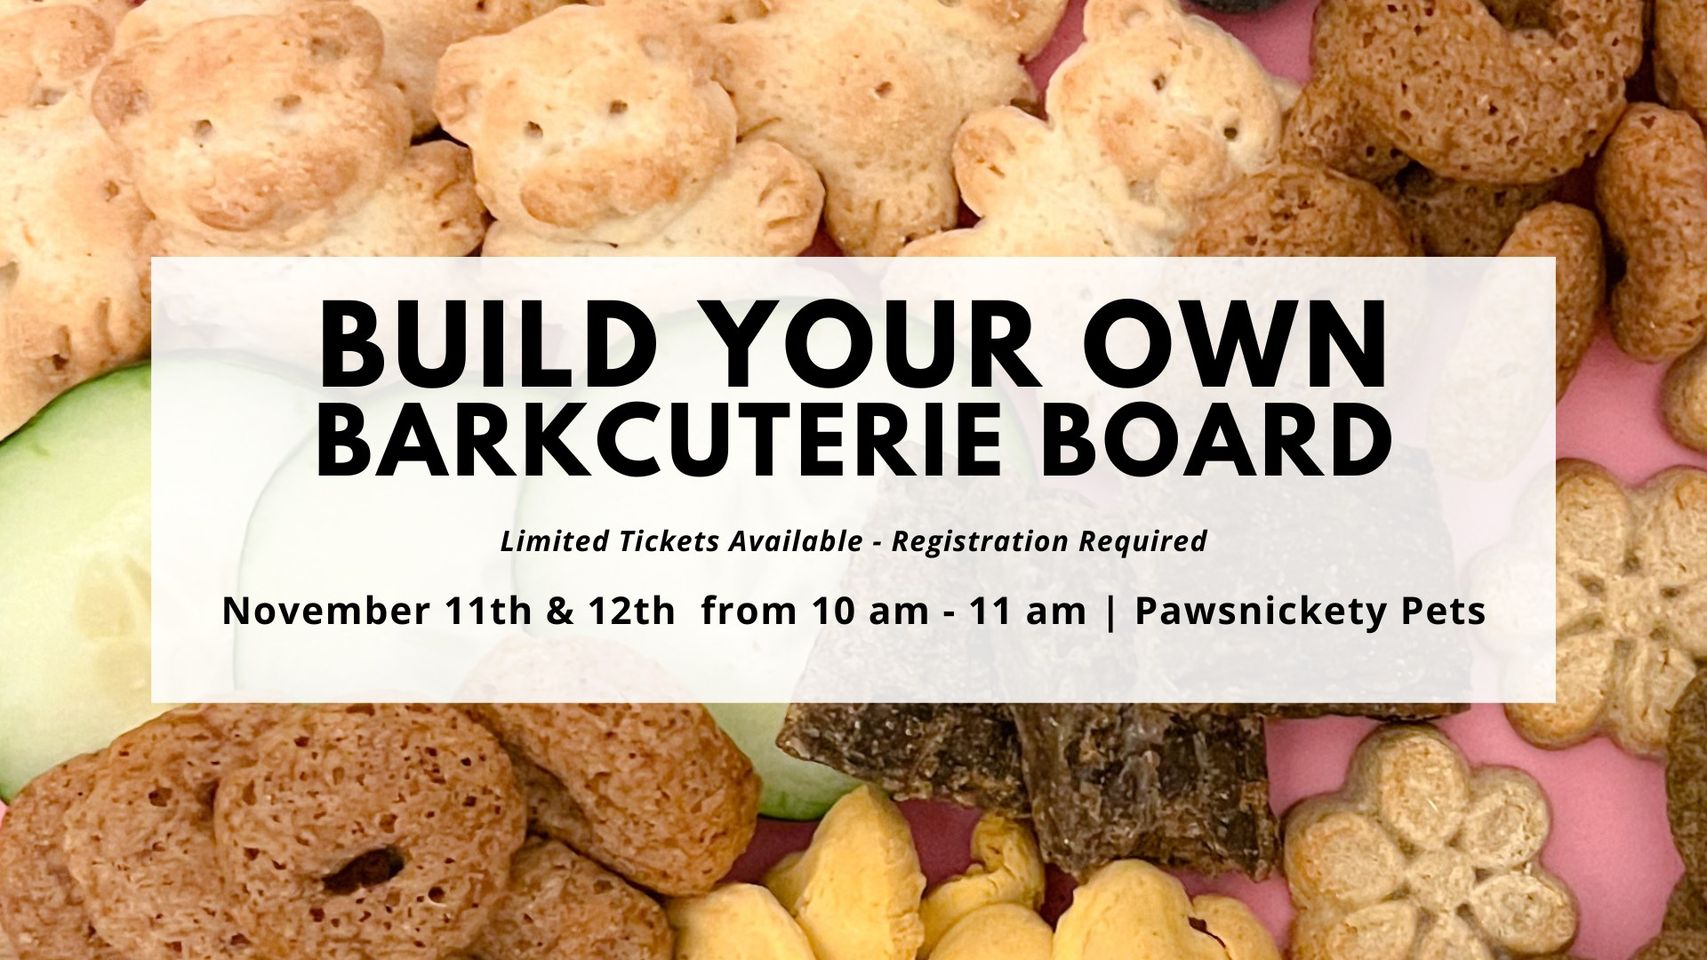 Pawsnickety Pets Presents: A Barkcuterie Board Pawty Like No Other!